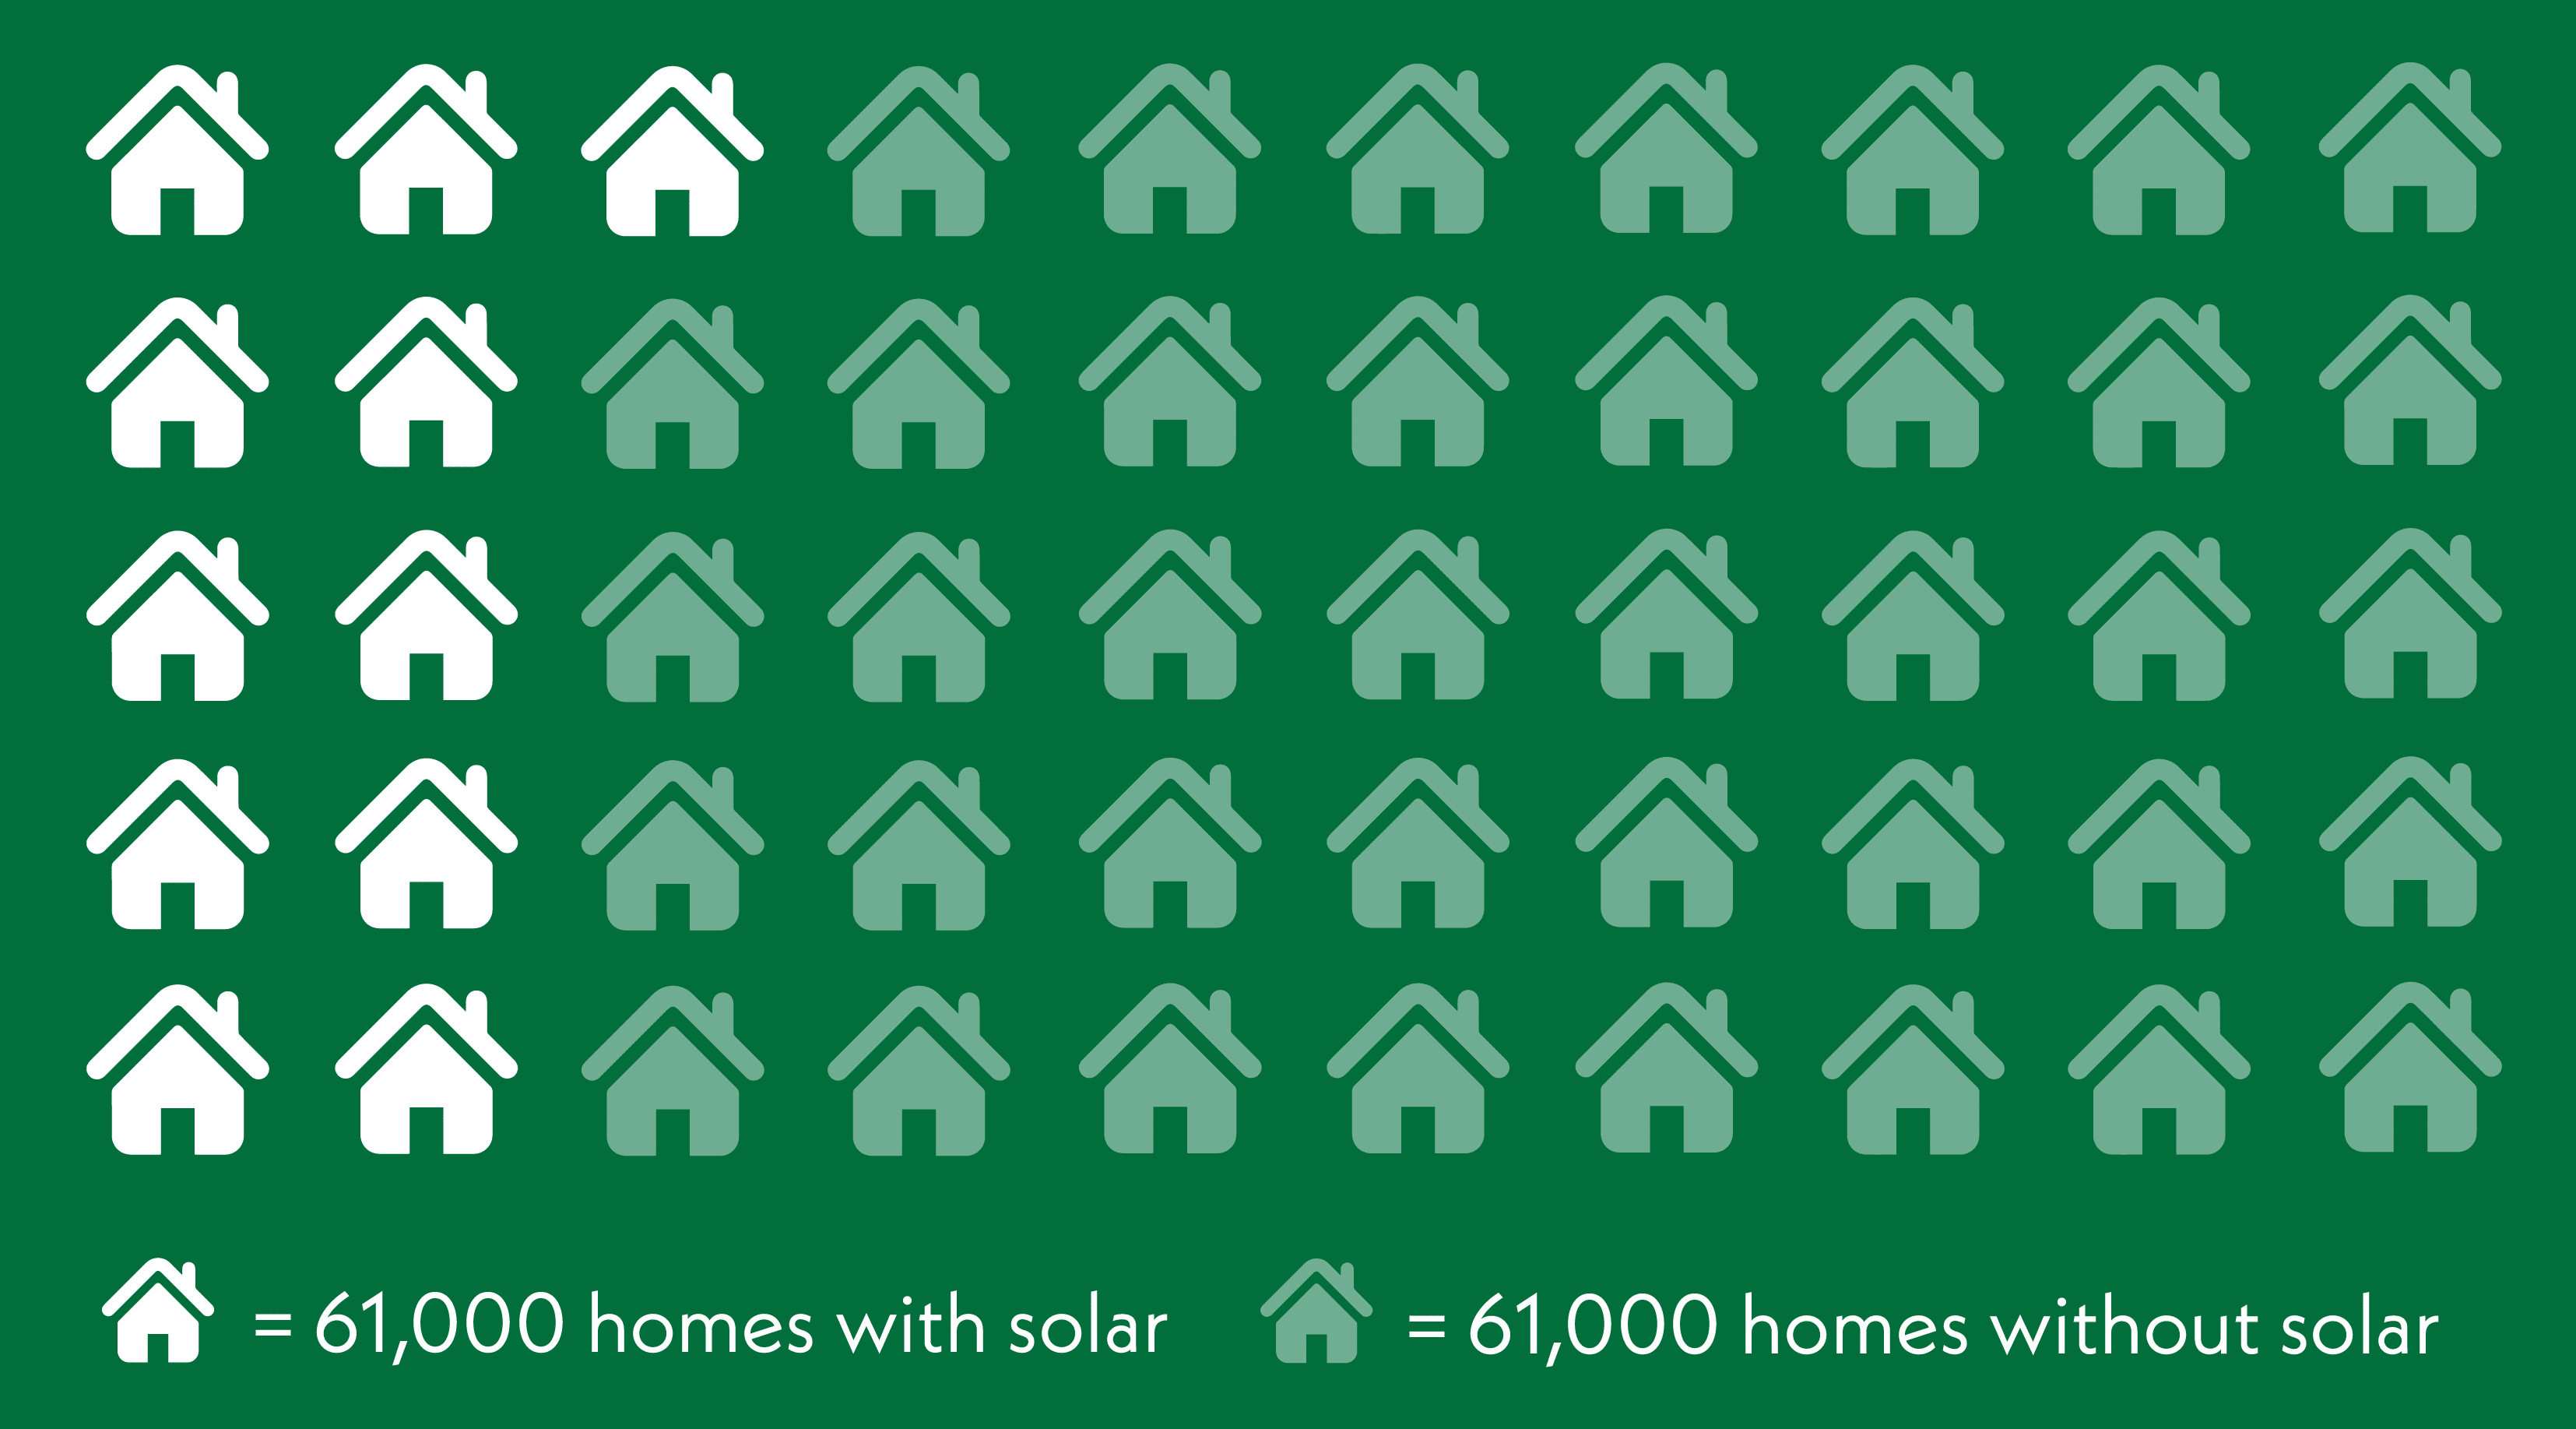 60000 homes with solar vs 61000 homes without solar